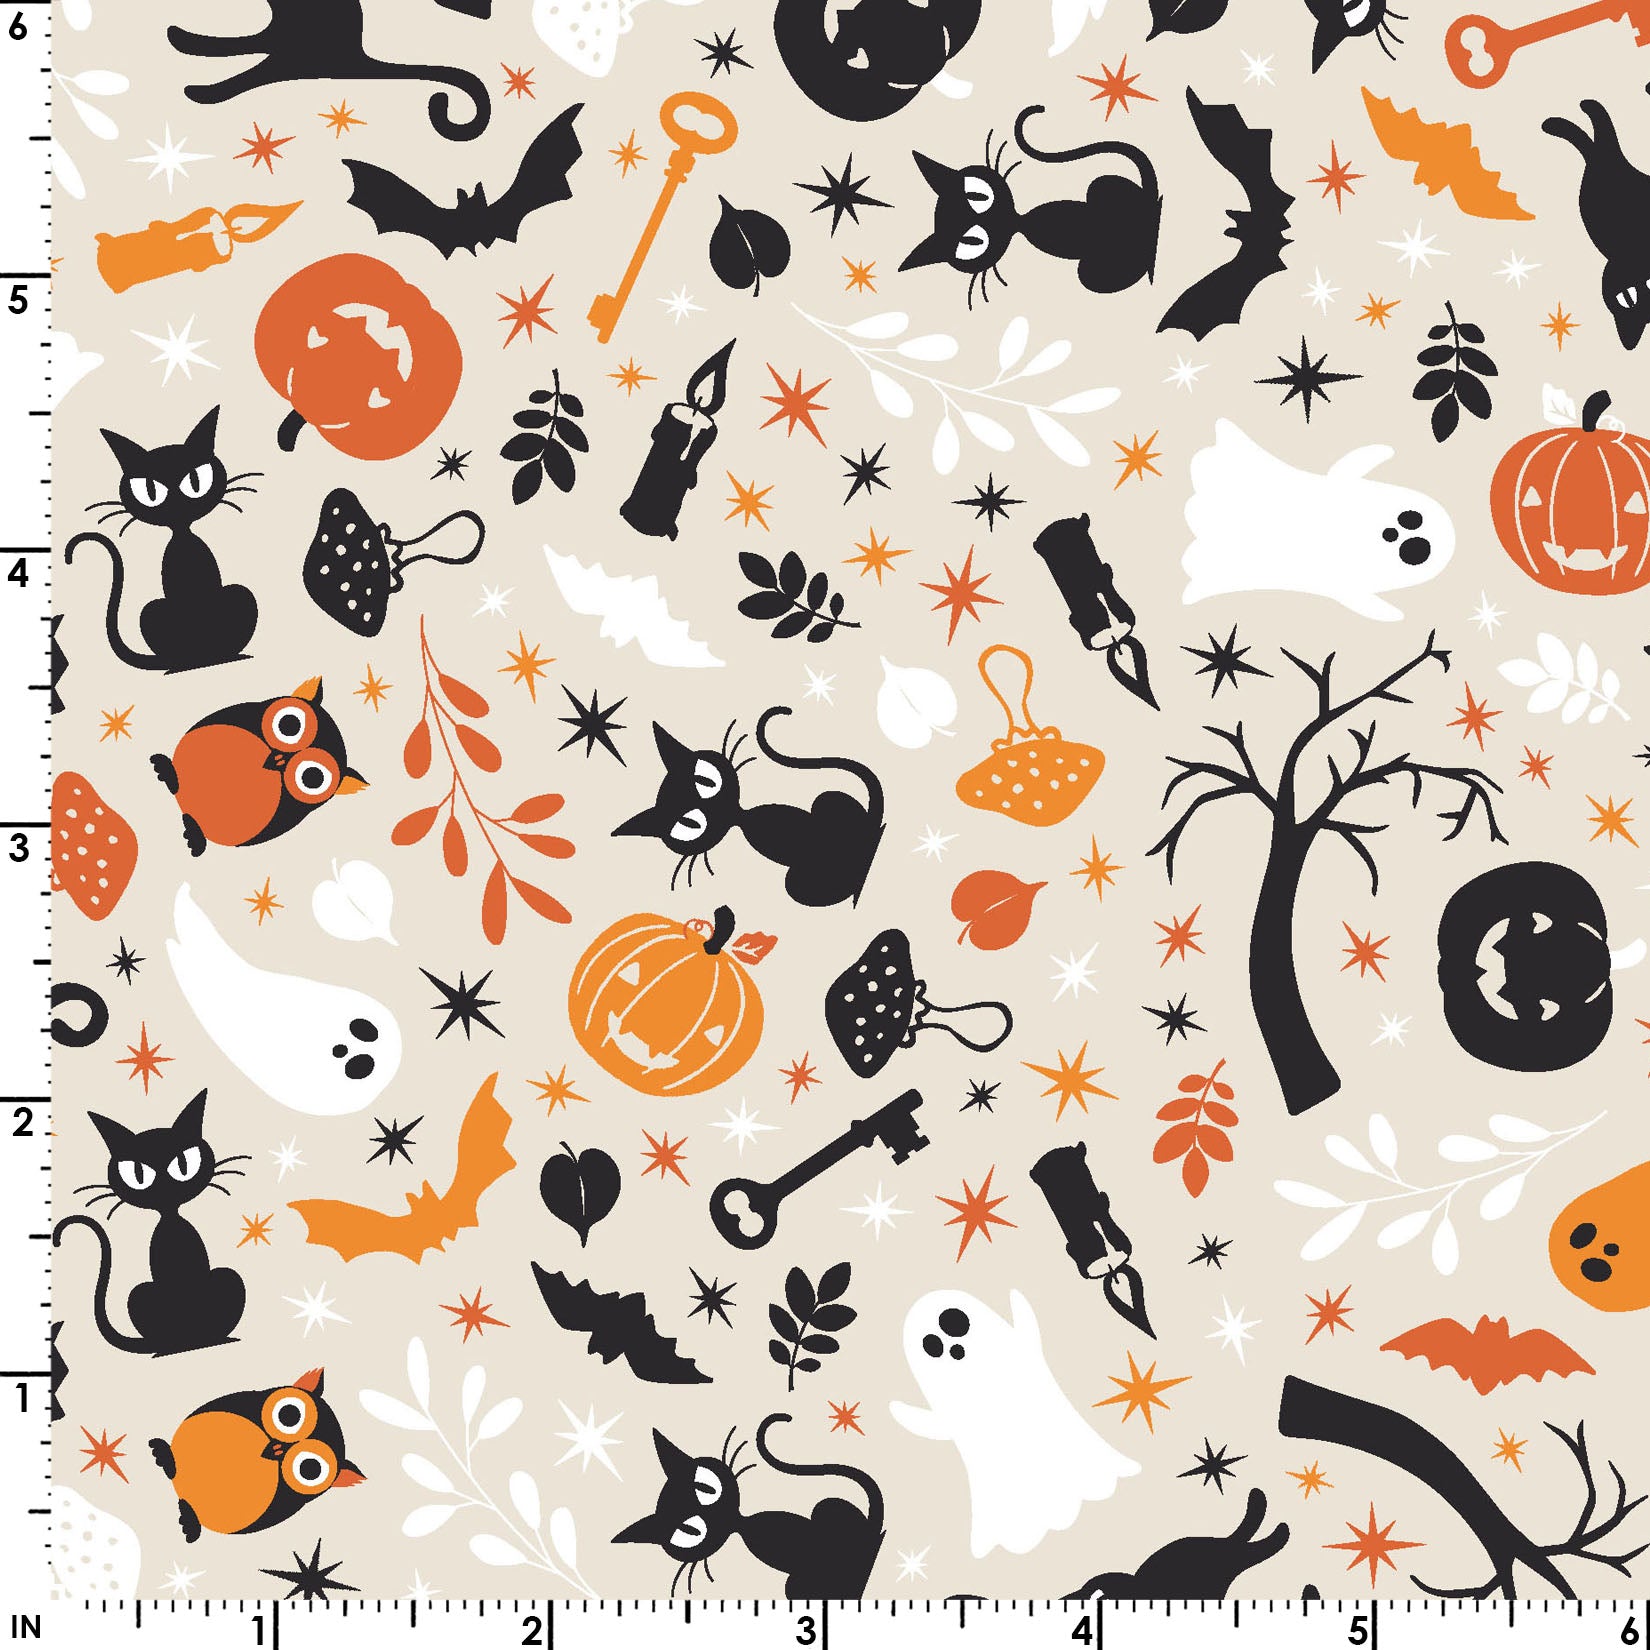 The Cats and Ghosts print on a cream background (MAS10571-E) from the Pumpkin and Potions line by Kimberbell for Maywood Studio features black cats, ghosts, pumpkins, owls, bats, spooky trees, and more. Photo shows details of the designs with a ruler to show the scale.